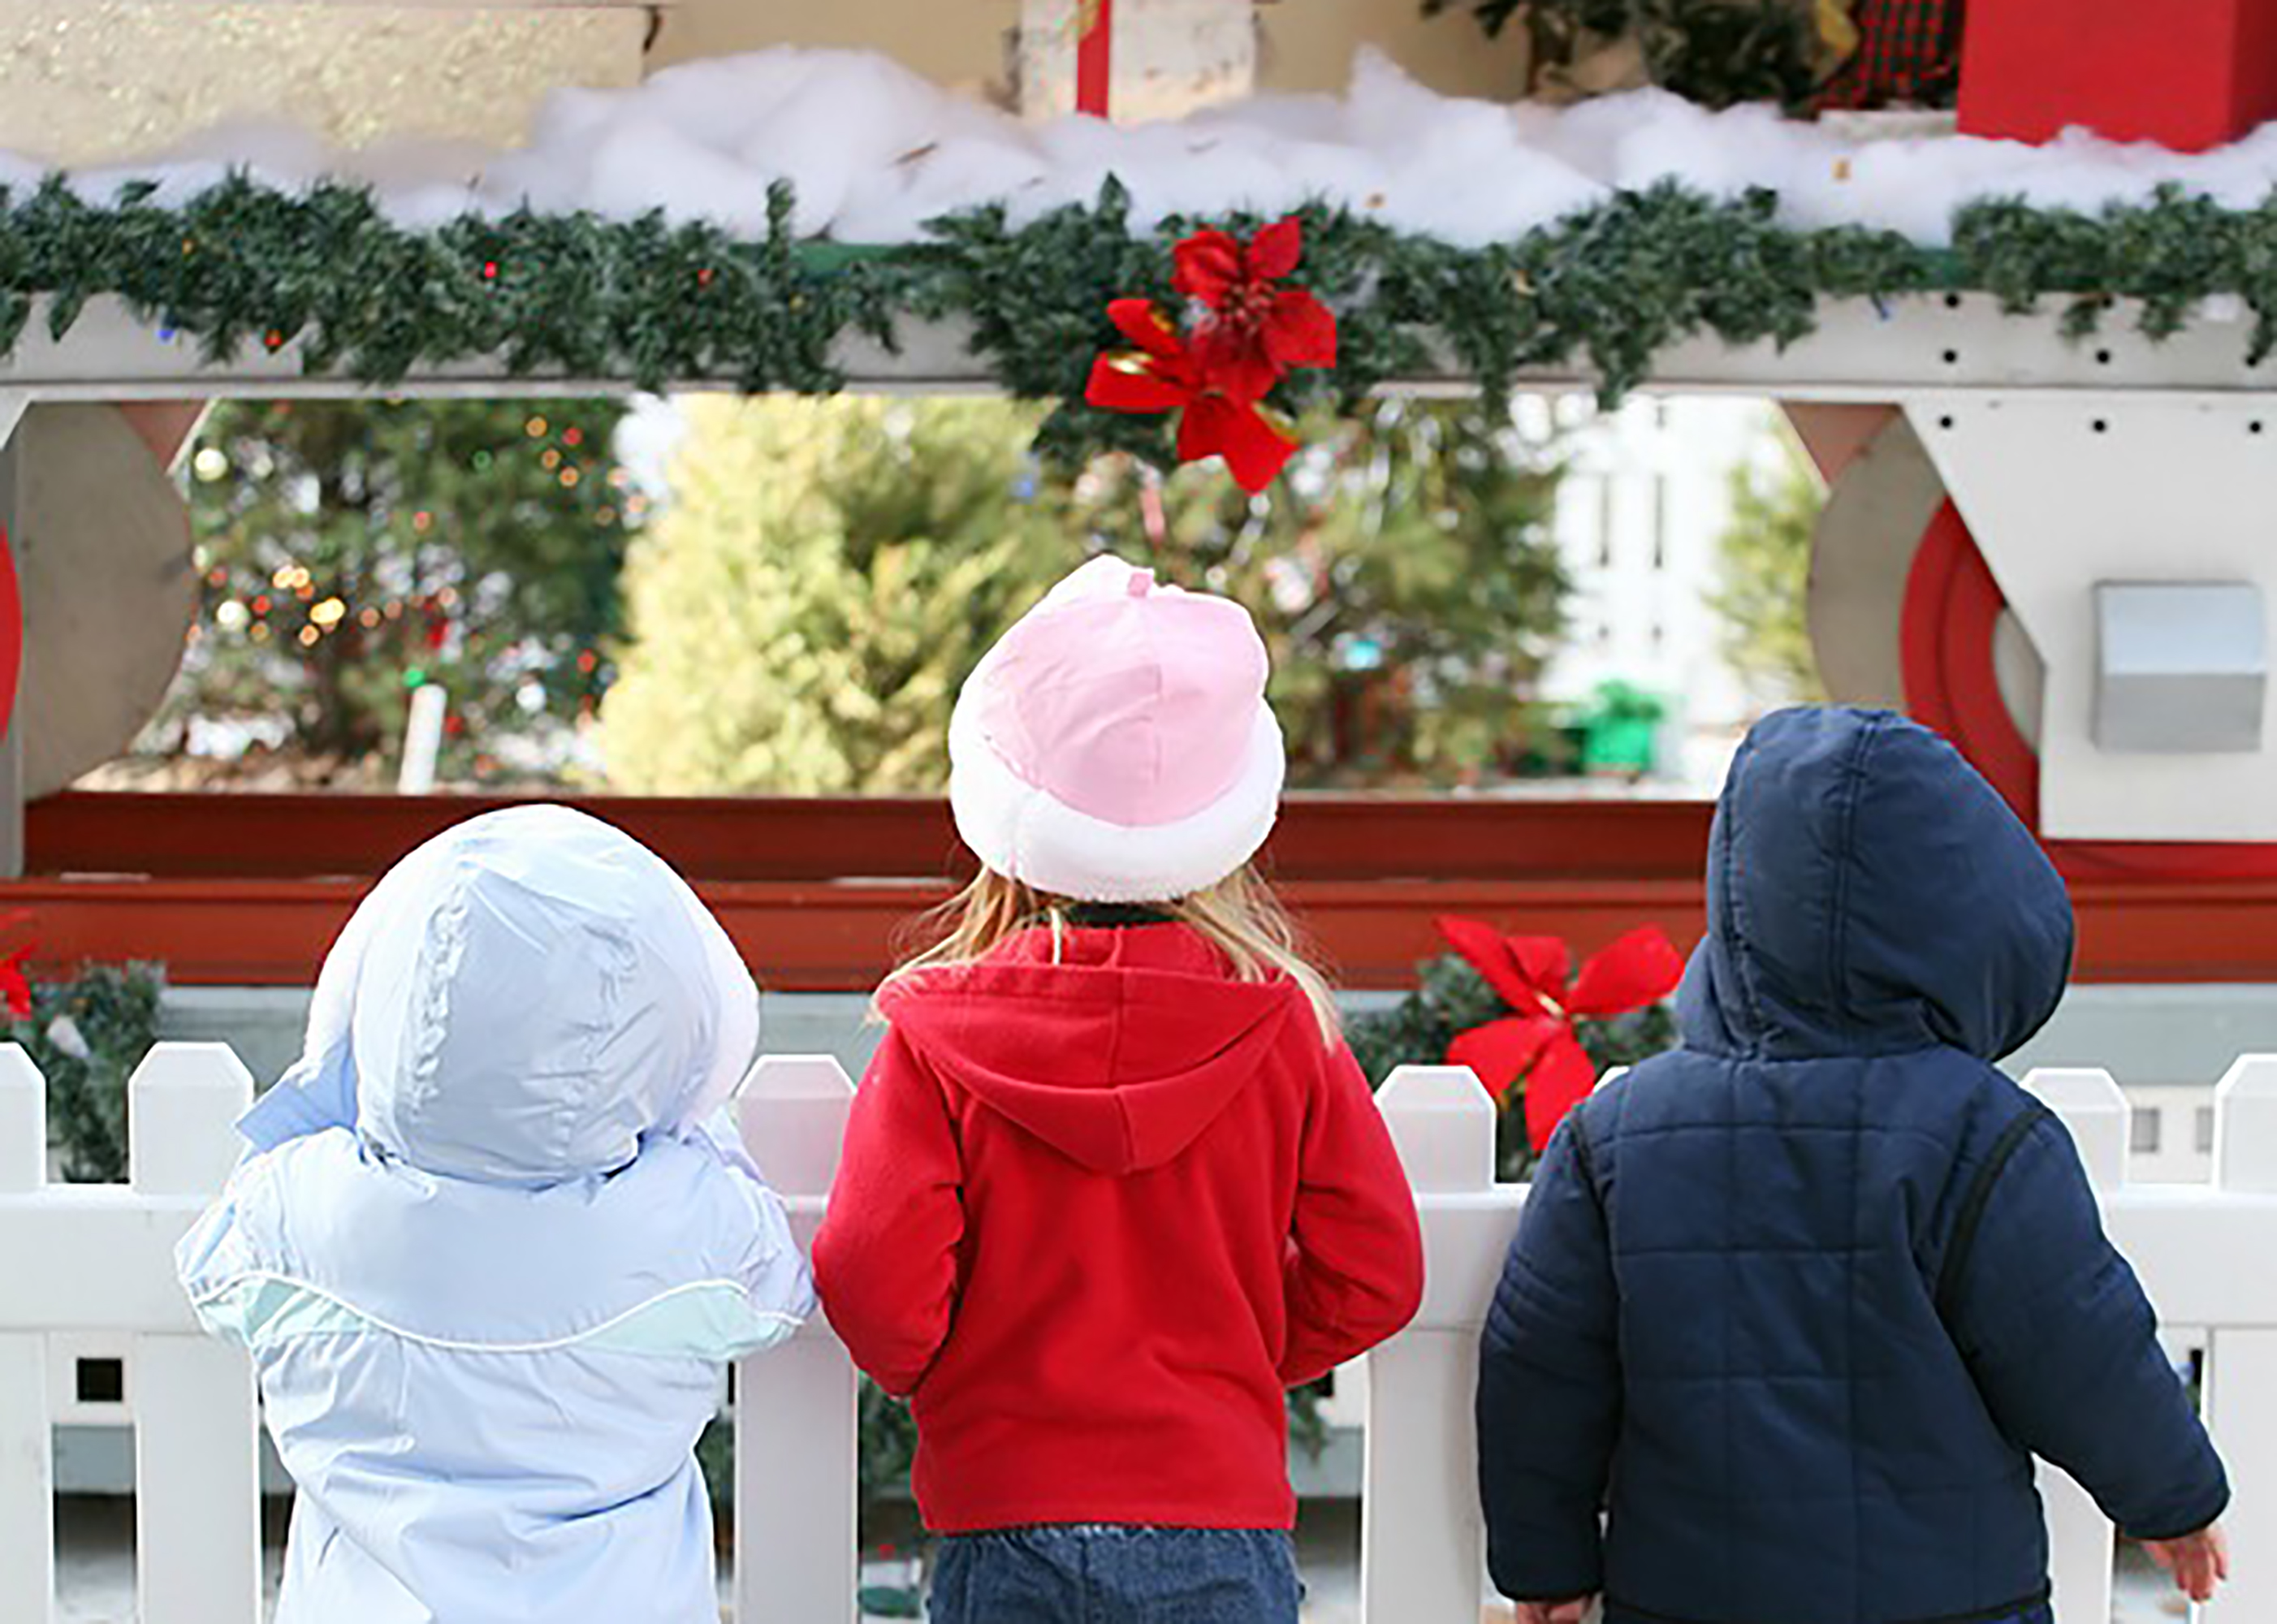 Children at a Chistmas festival